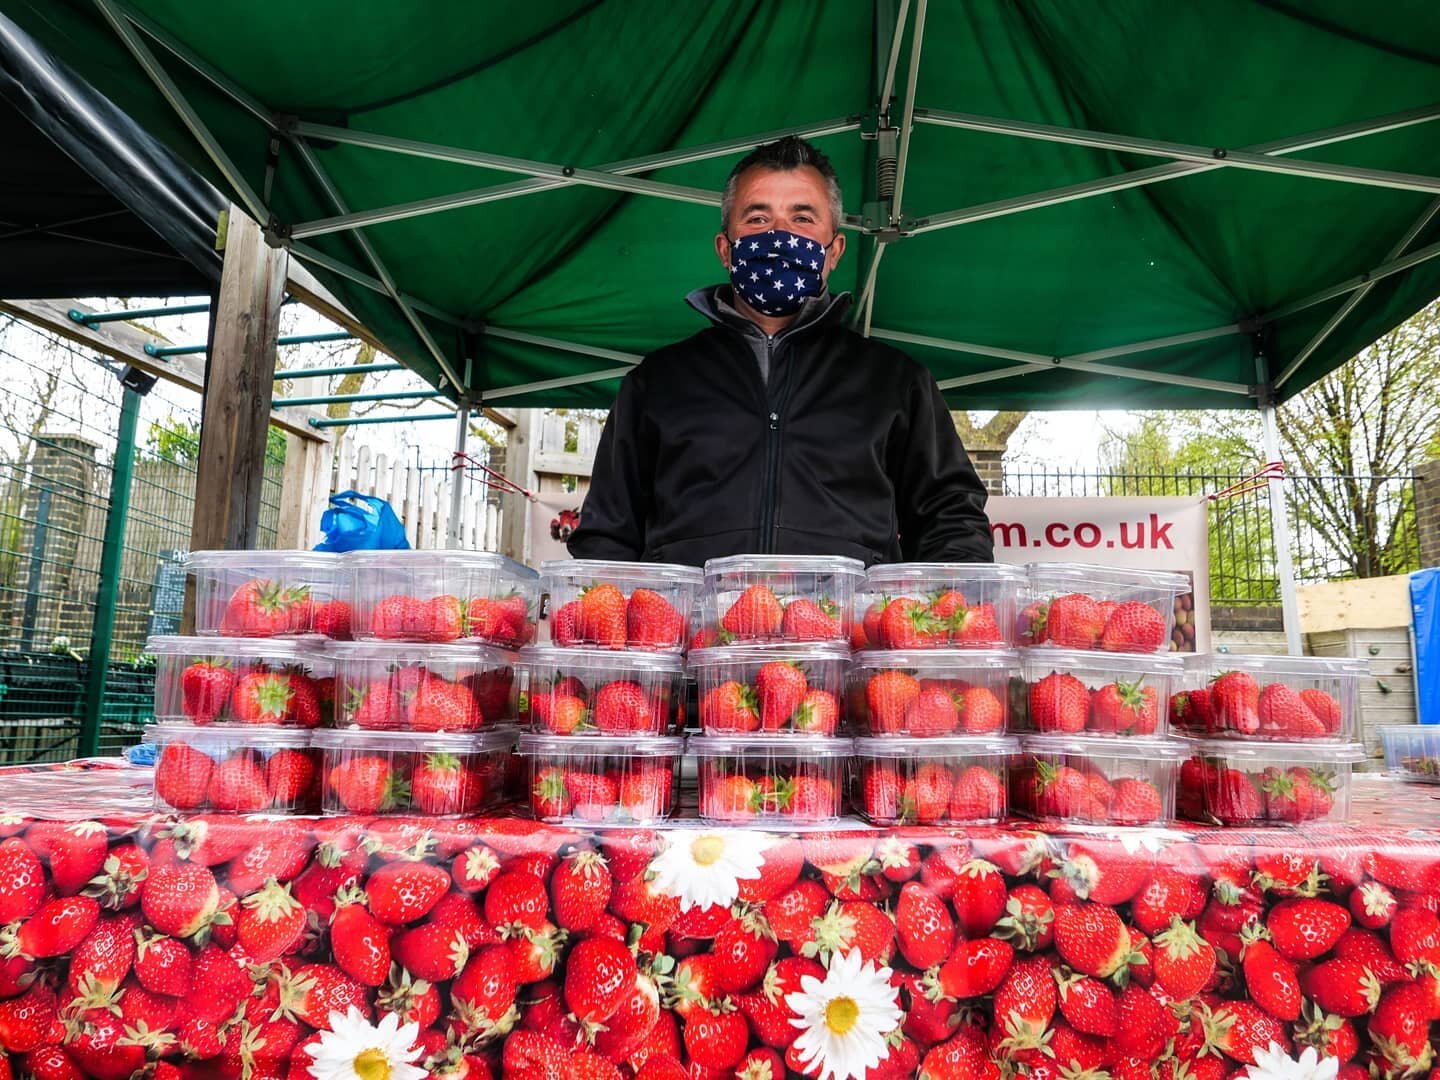 29 degrees this weekend youre going to need some of these! Alex at Five Ways Fruit Farm [➡️📷 🍓], see you today in the school yard 9-3pm #StayHopefulSupportLocal #PrimroseHillFoodMarket